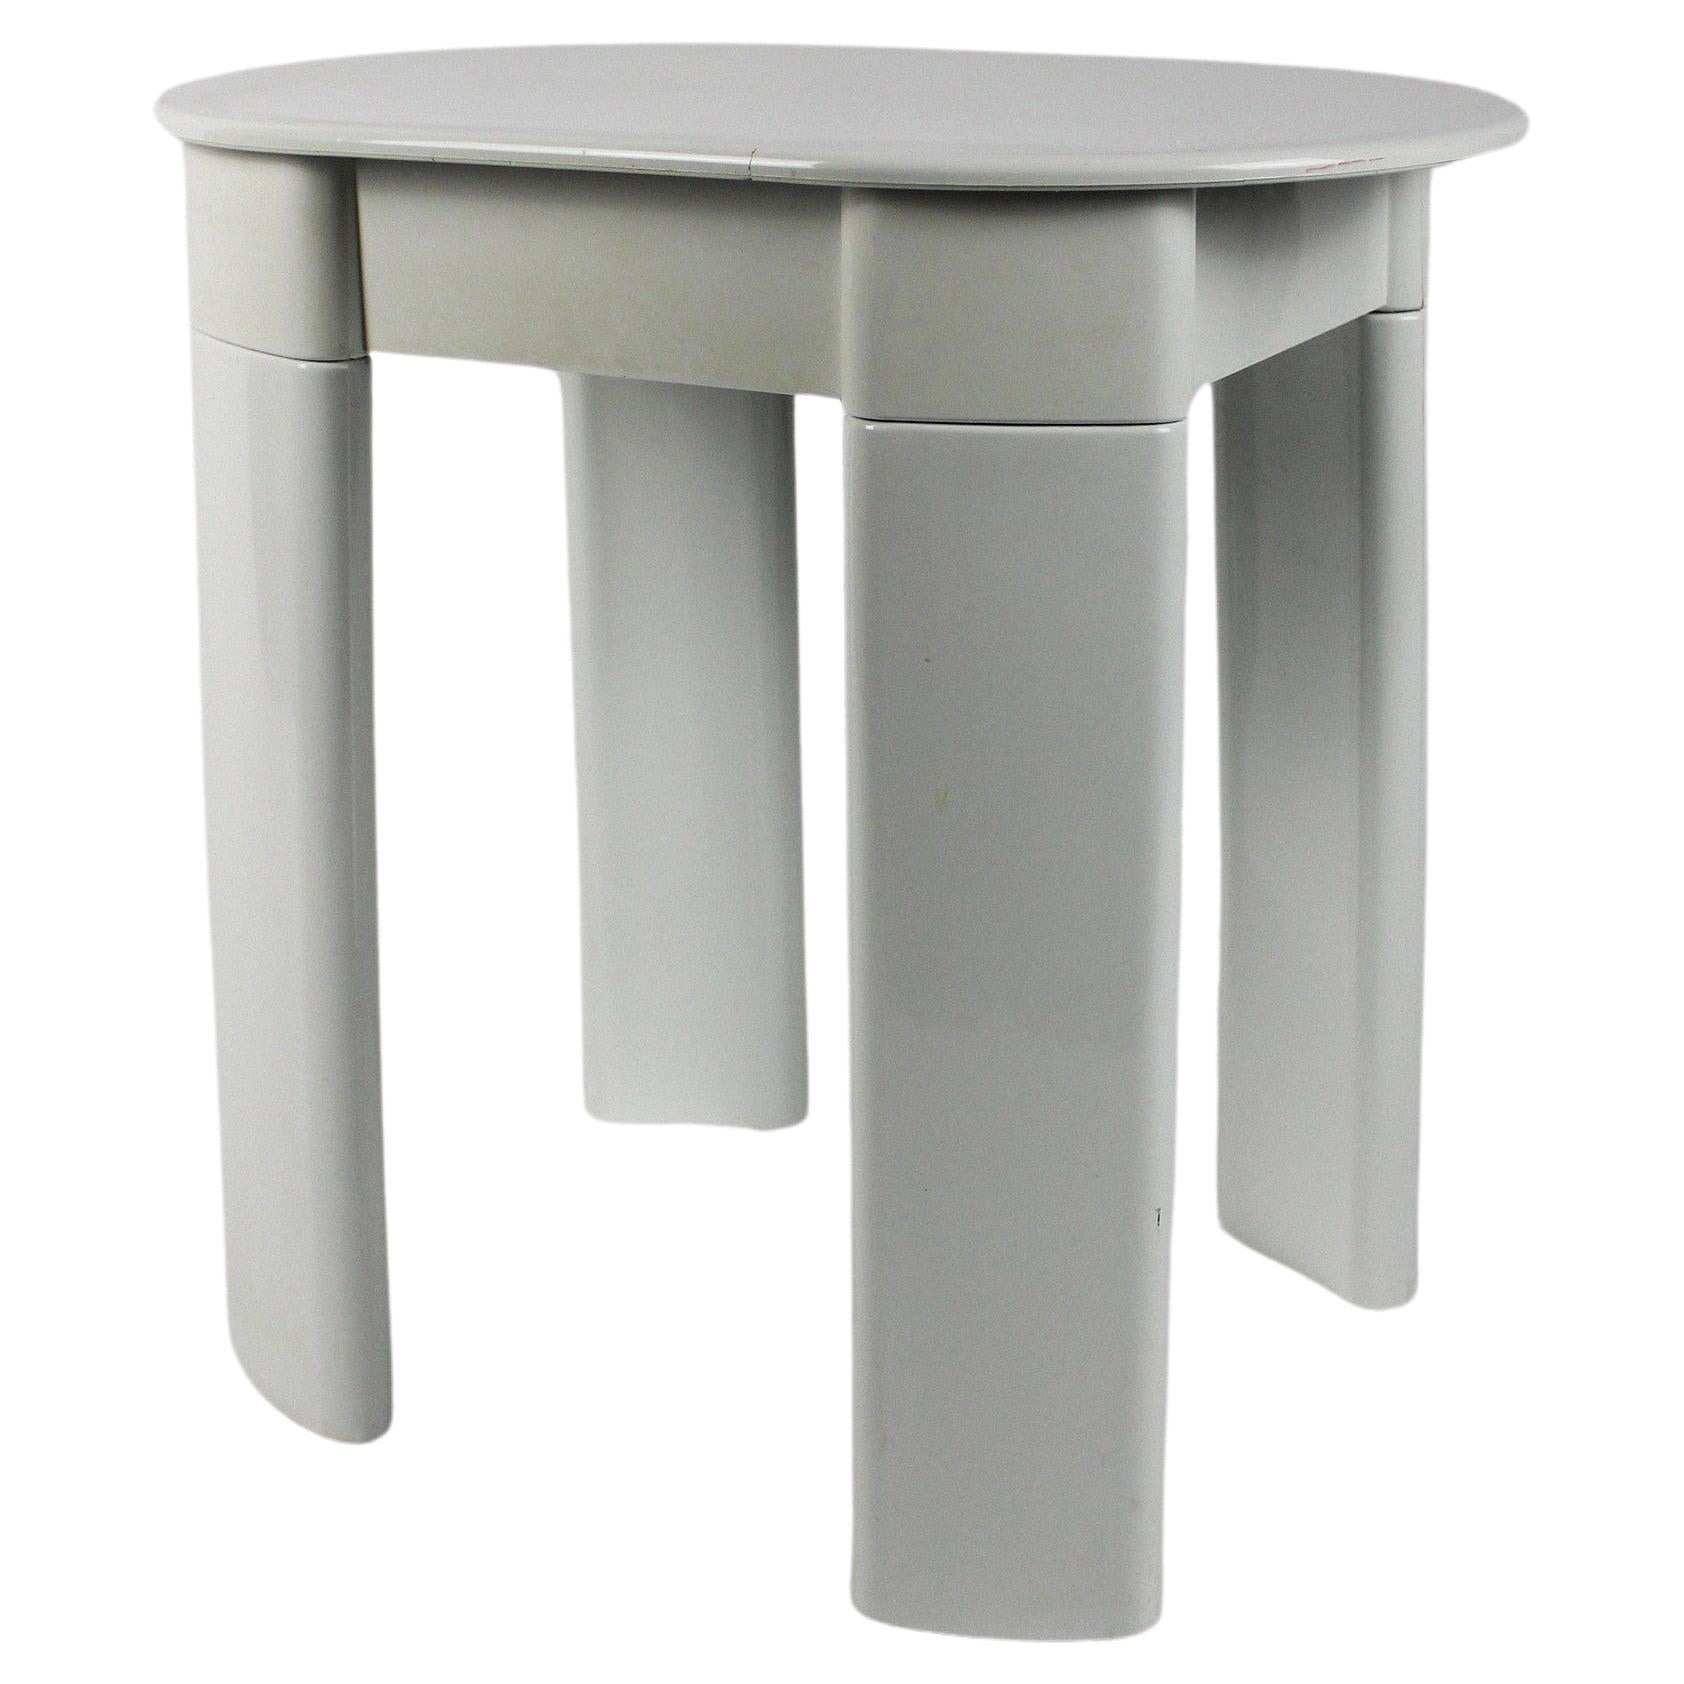 Olaf Von Bohr Side Table Space Age Stool Gedy Plastic Italy 1970's For Sale